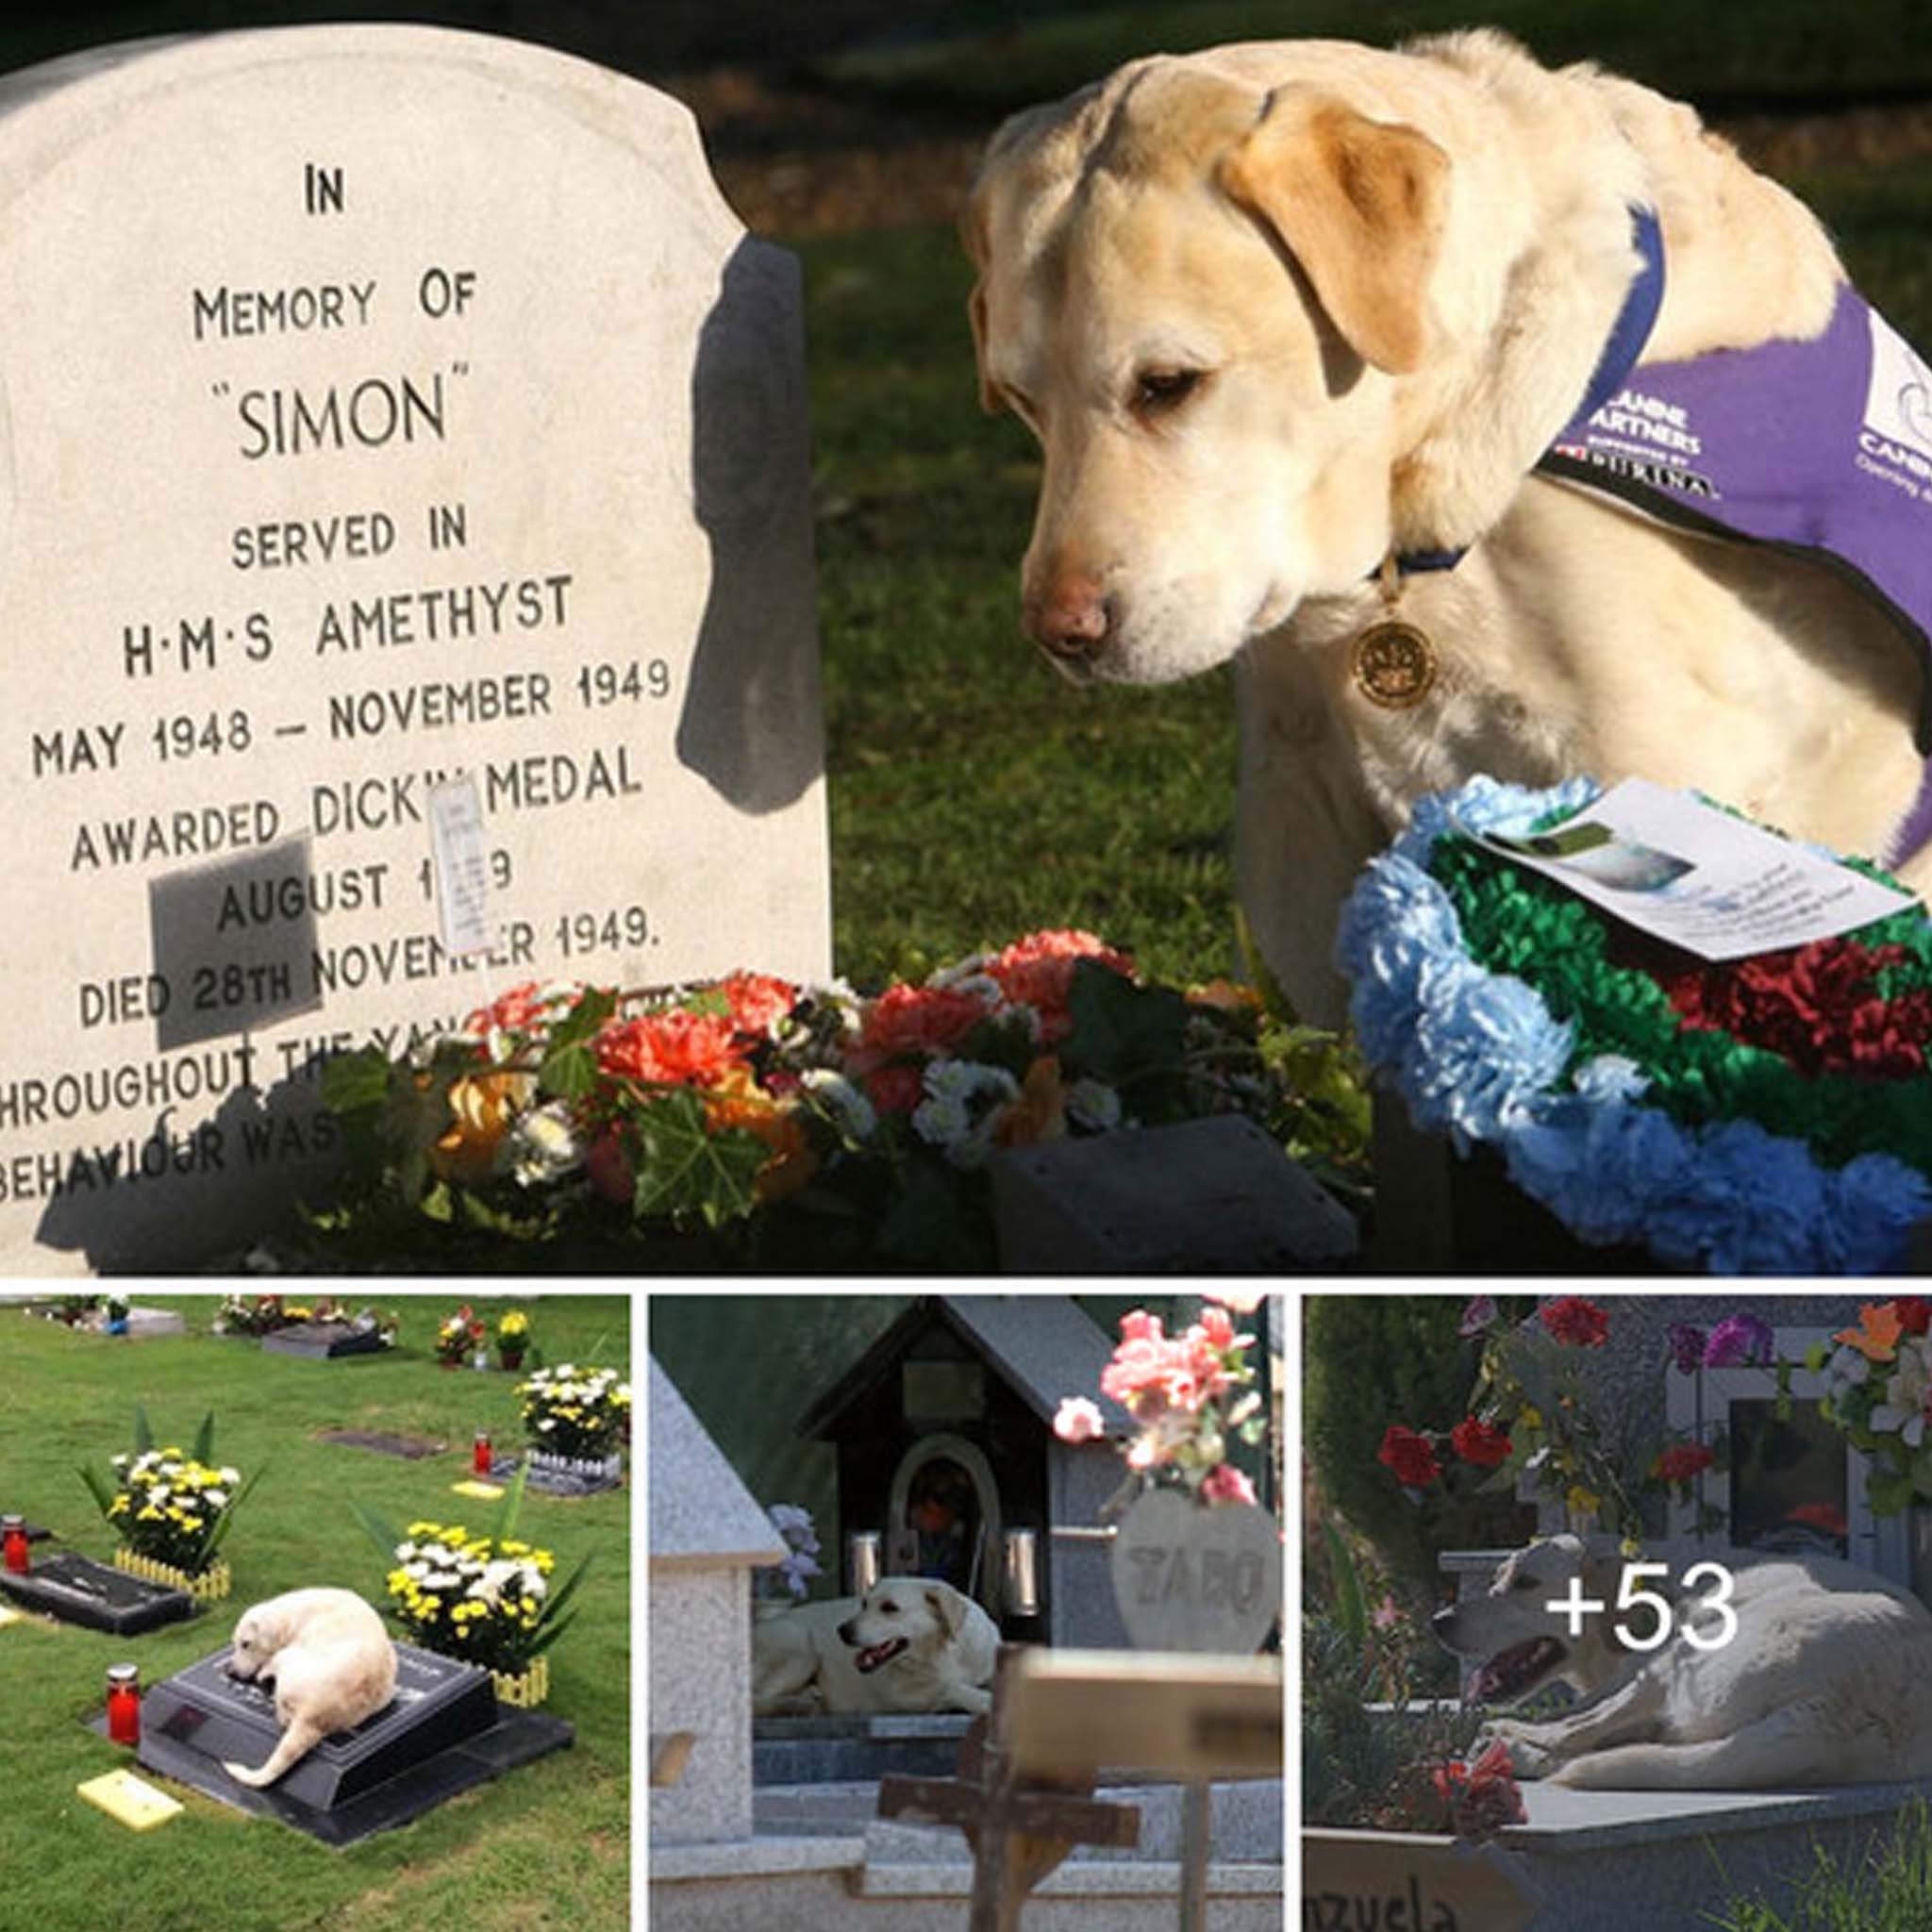 “Nine Years of Loyalty: The Dog Stands by and Never Leaves to Protect His Master’s Final Resting Place”